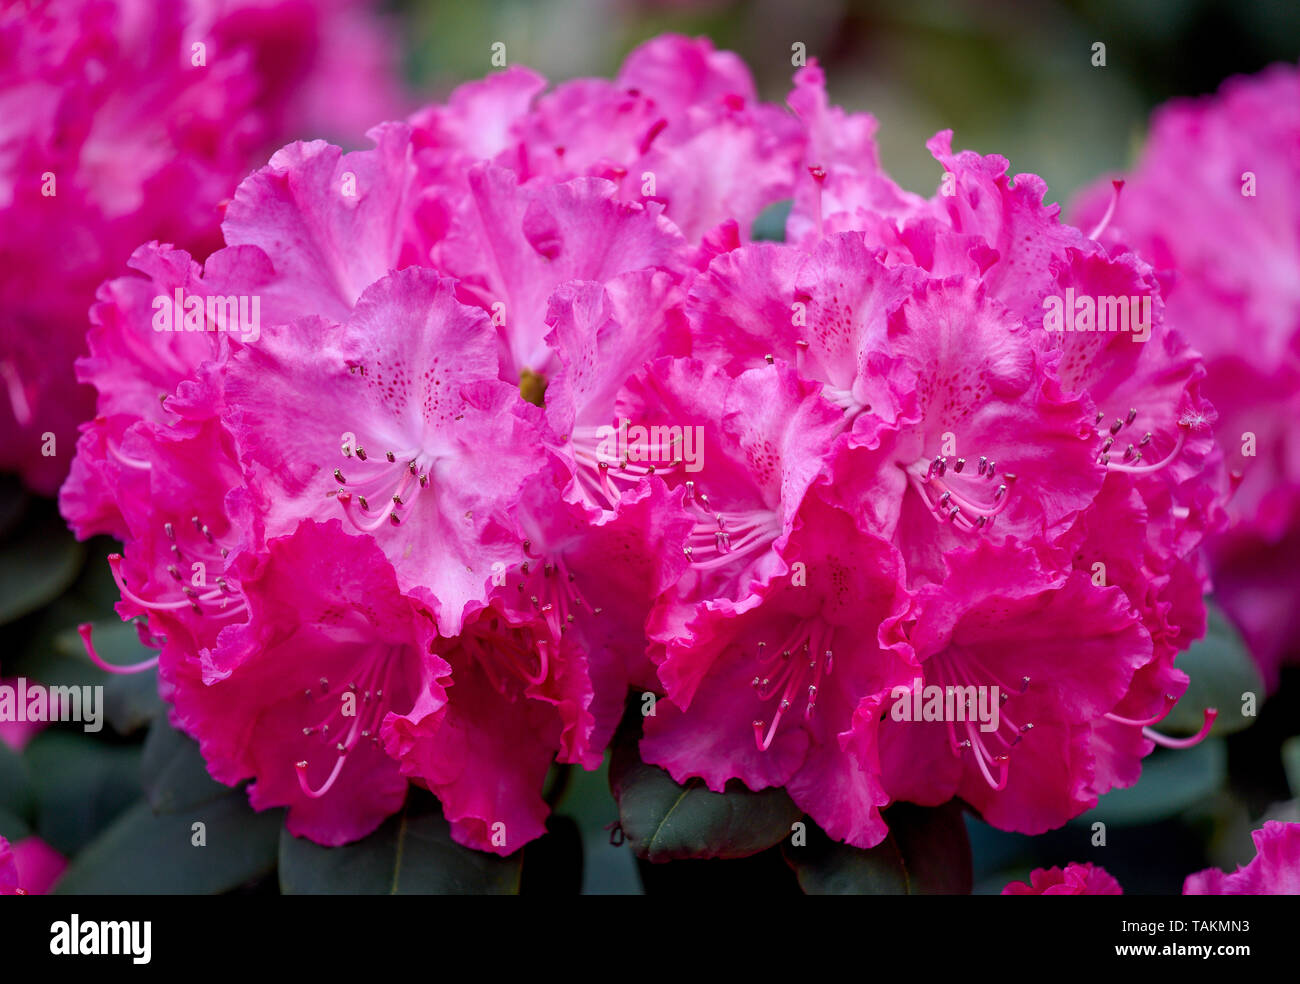 Pink Rhodododendron Germania flowers close up Stock Photo